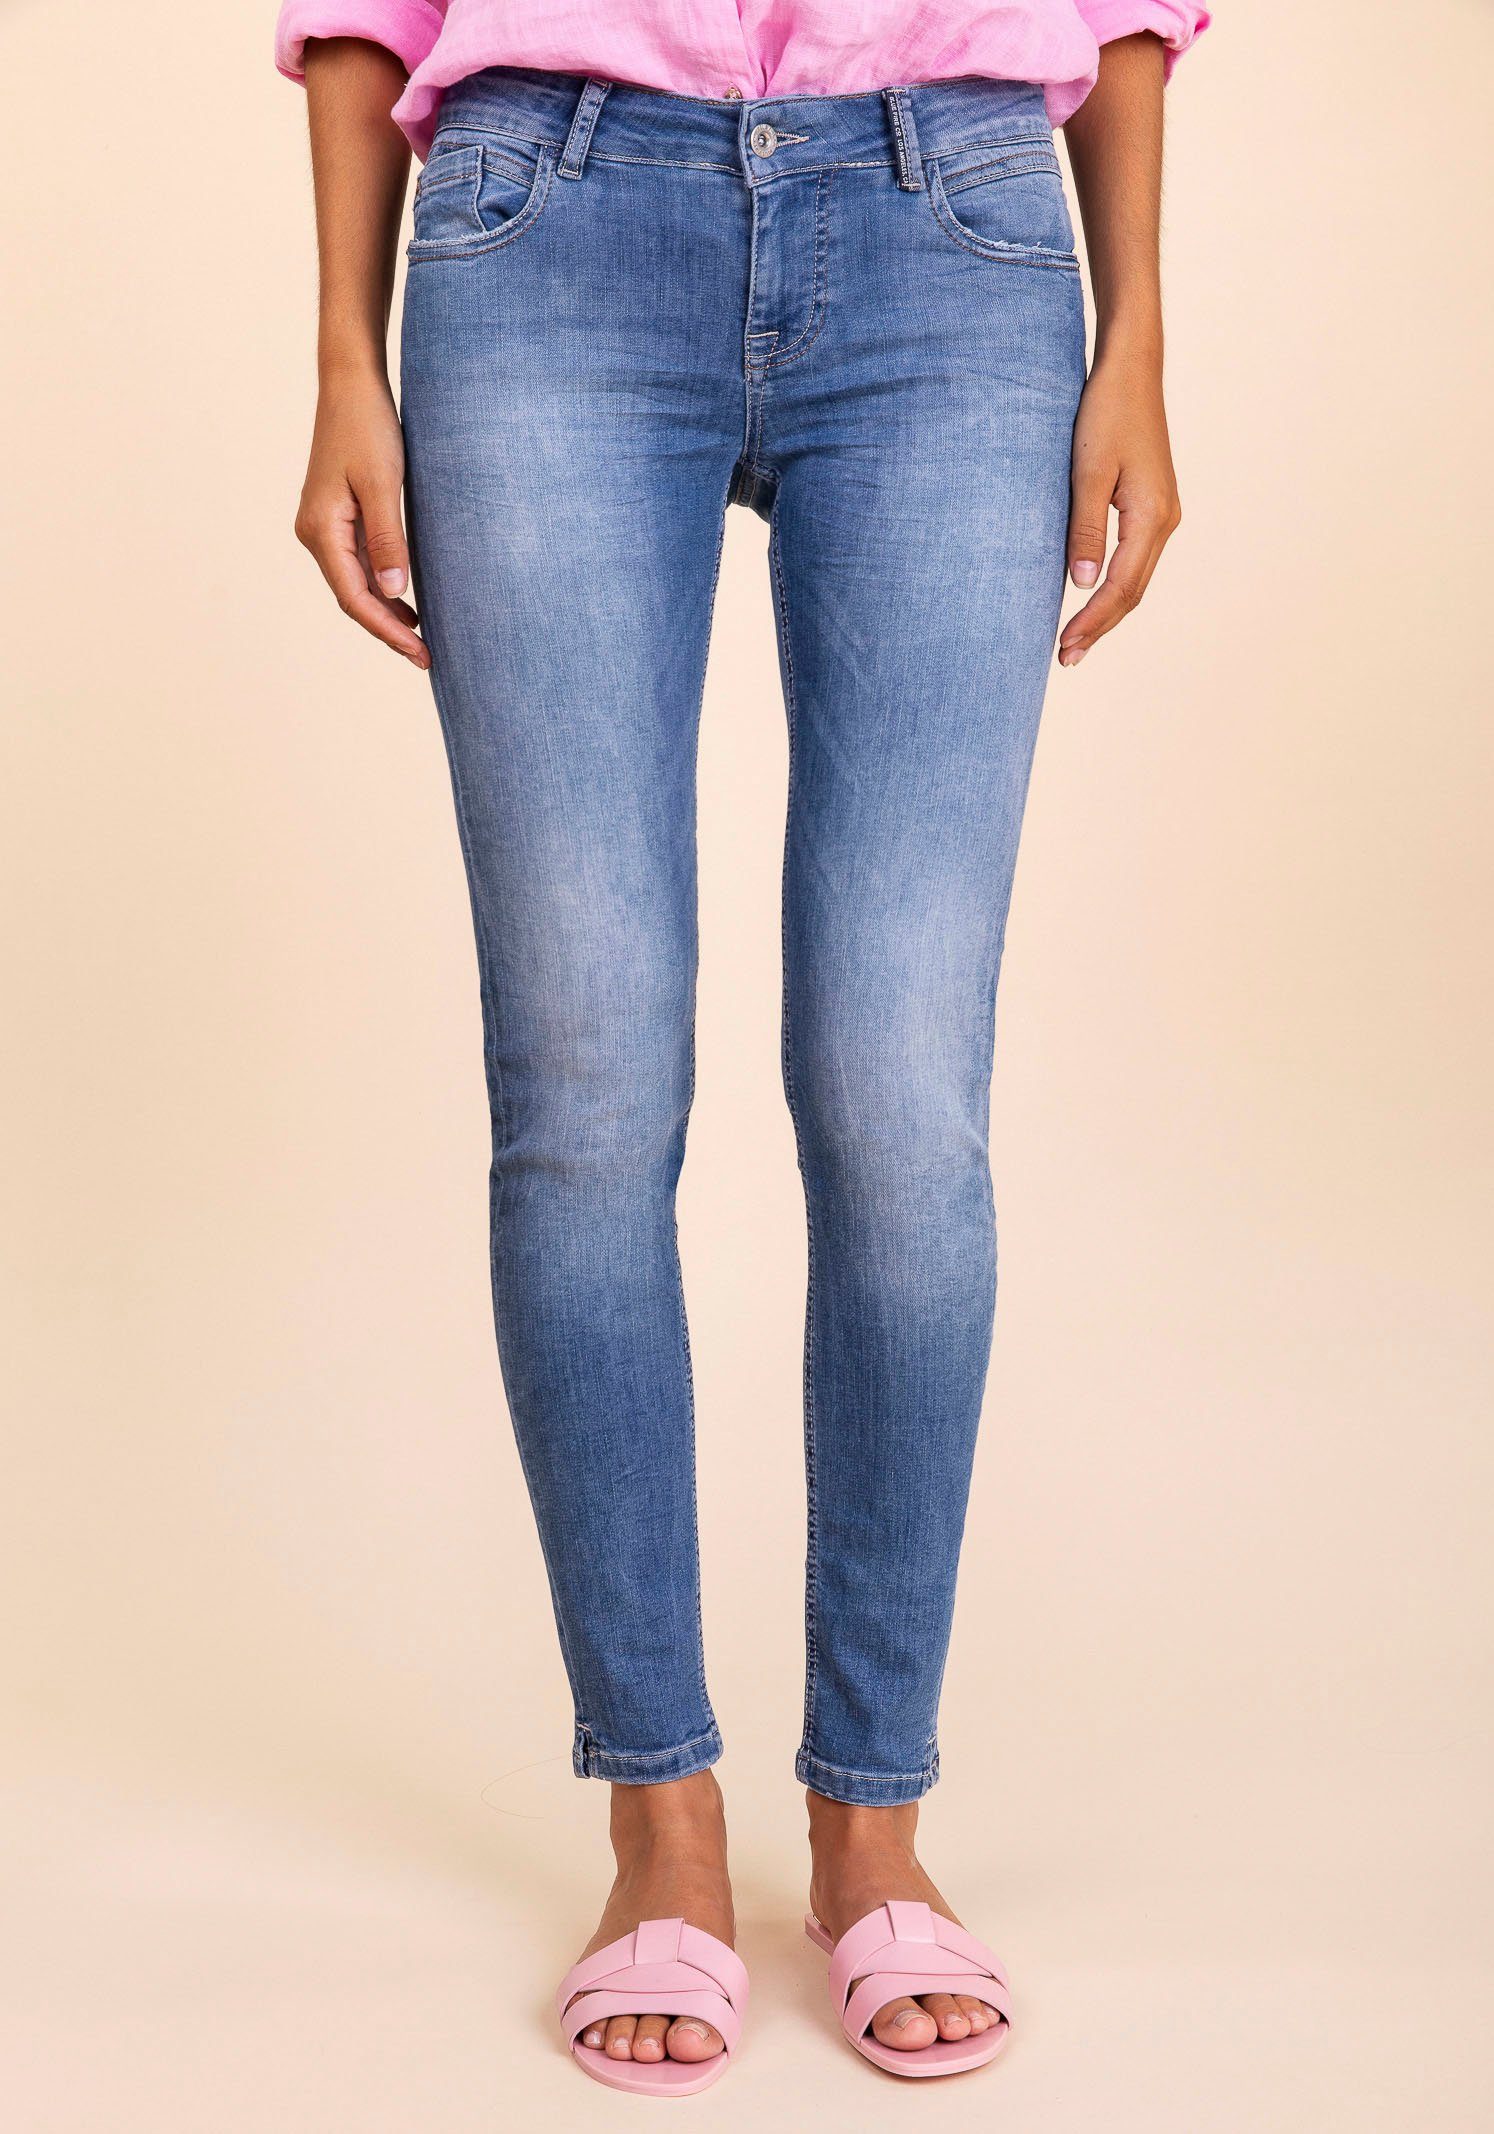 BLUE FIRE Skinny-fit-Jeans ALICIA online kaufen | OTTO